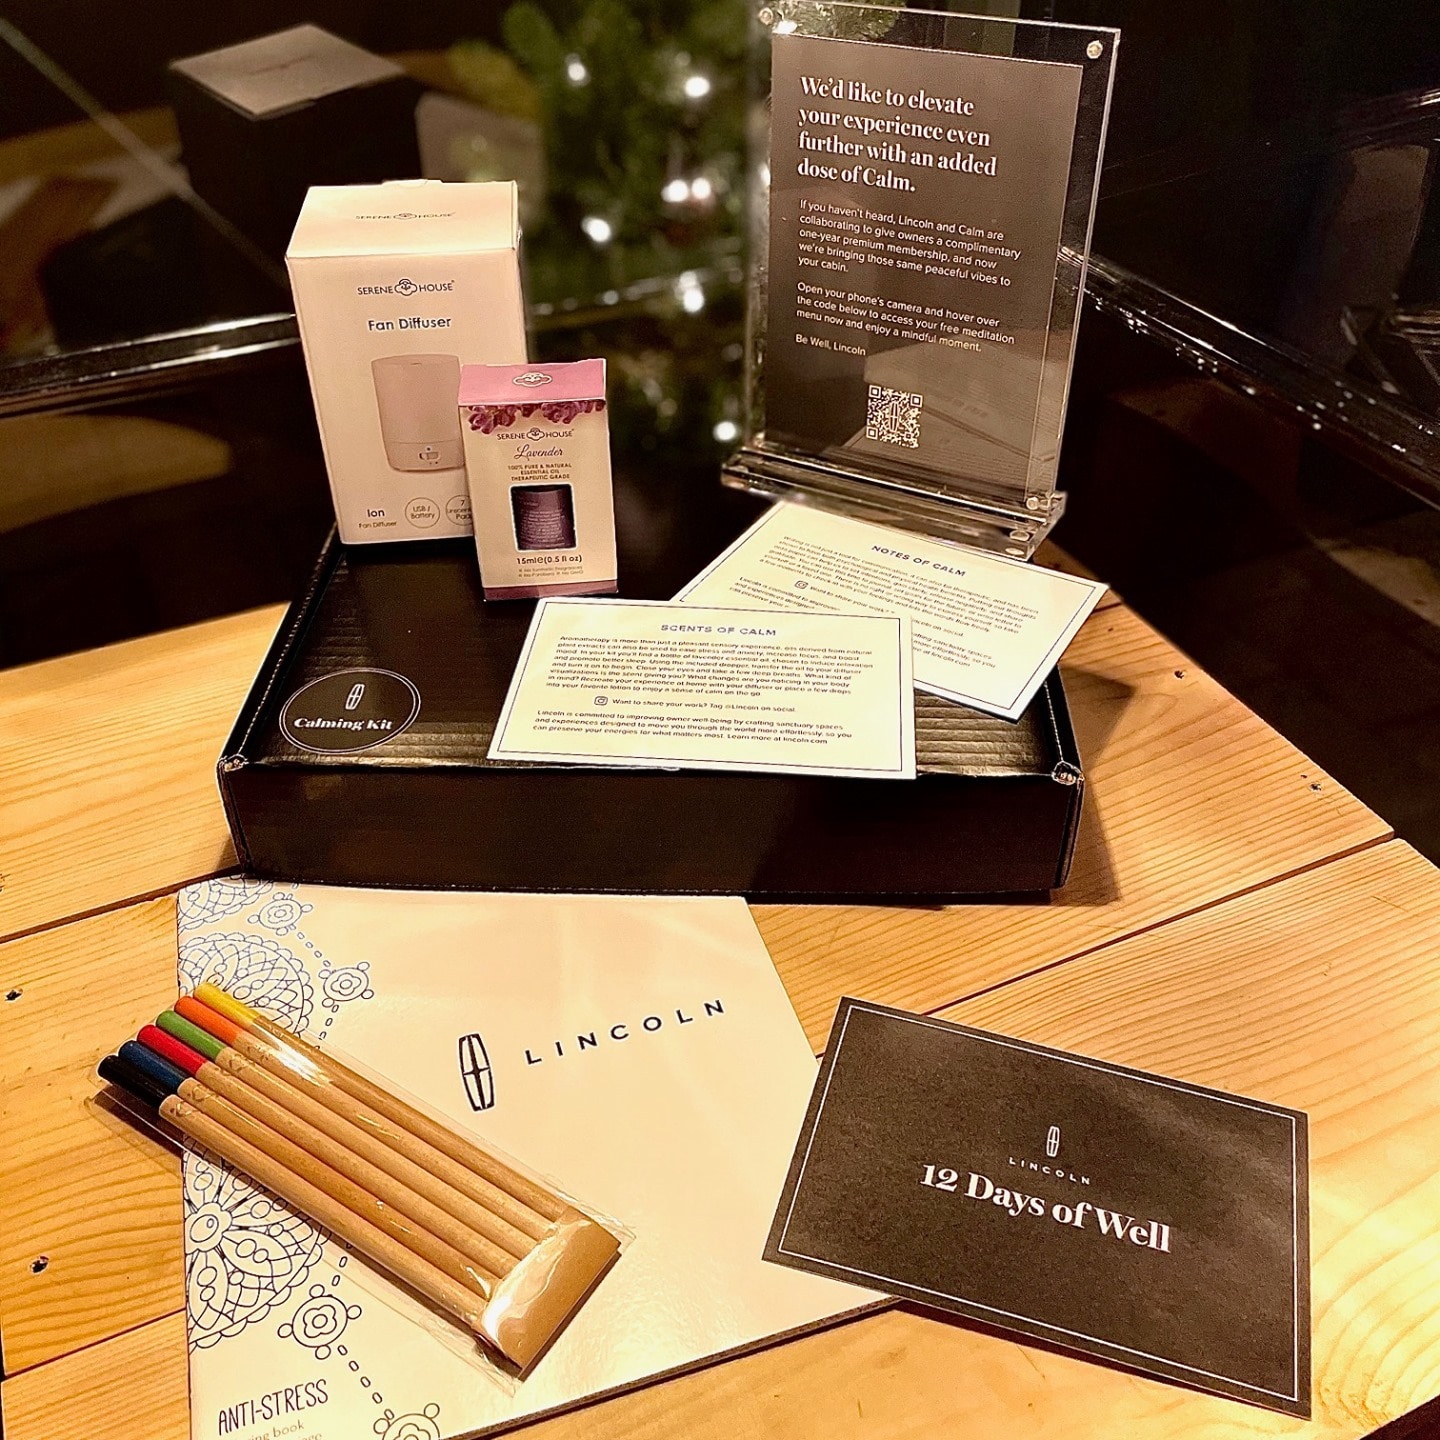 This holiday season our friends at @lincoln are bringing 12 Days of Well to the Seaport. Through Dec 13, guests of #TheGreens at @pier17ny will receive the ultimate wellness essentials. Keep an eye on our channels for other ways #Lincoln is spreading holiday cheer.